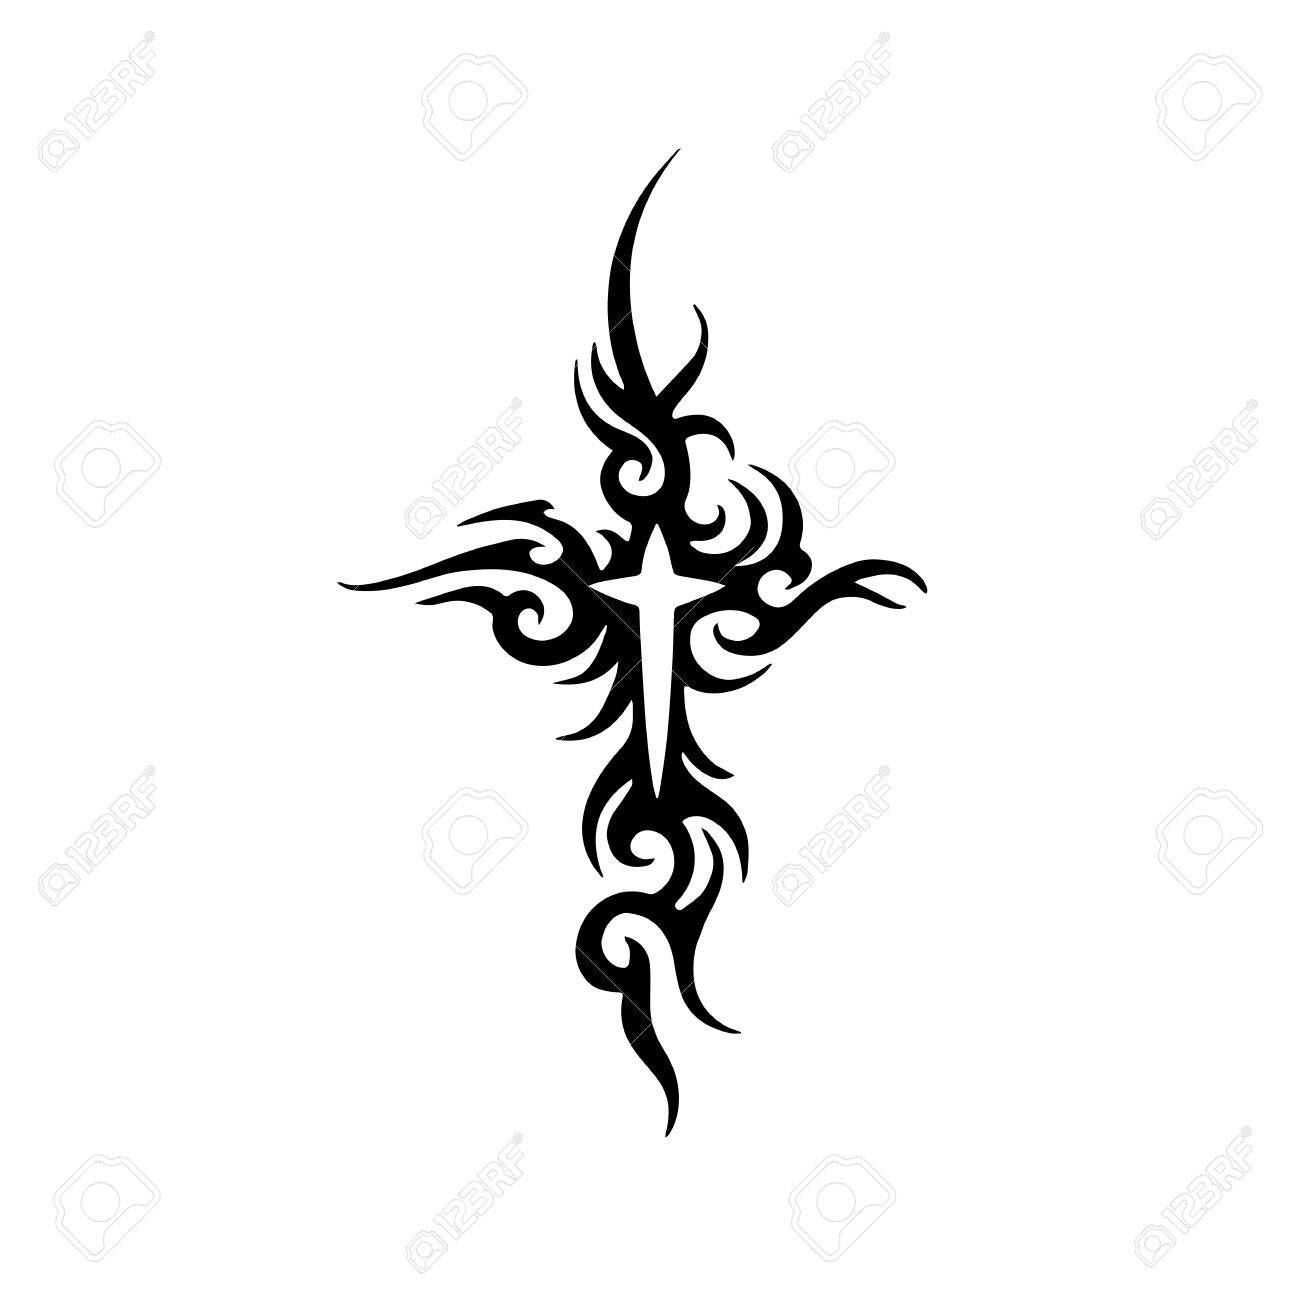 Tribal Cross Tattoo Design Royalty Free Cliparts Vectors And Stock in sizing 1300 X 1300